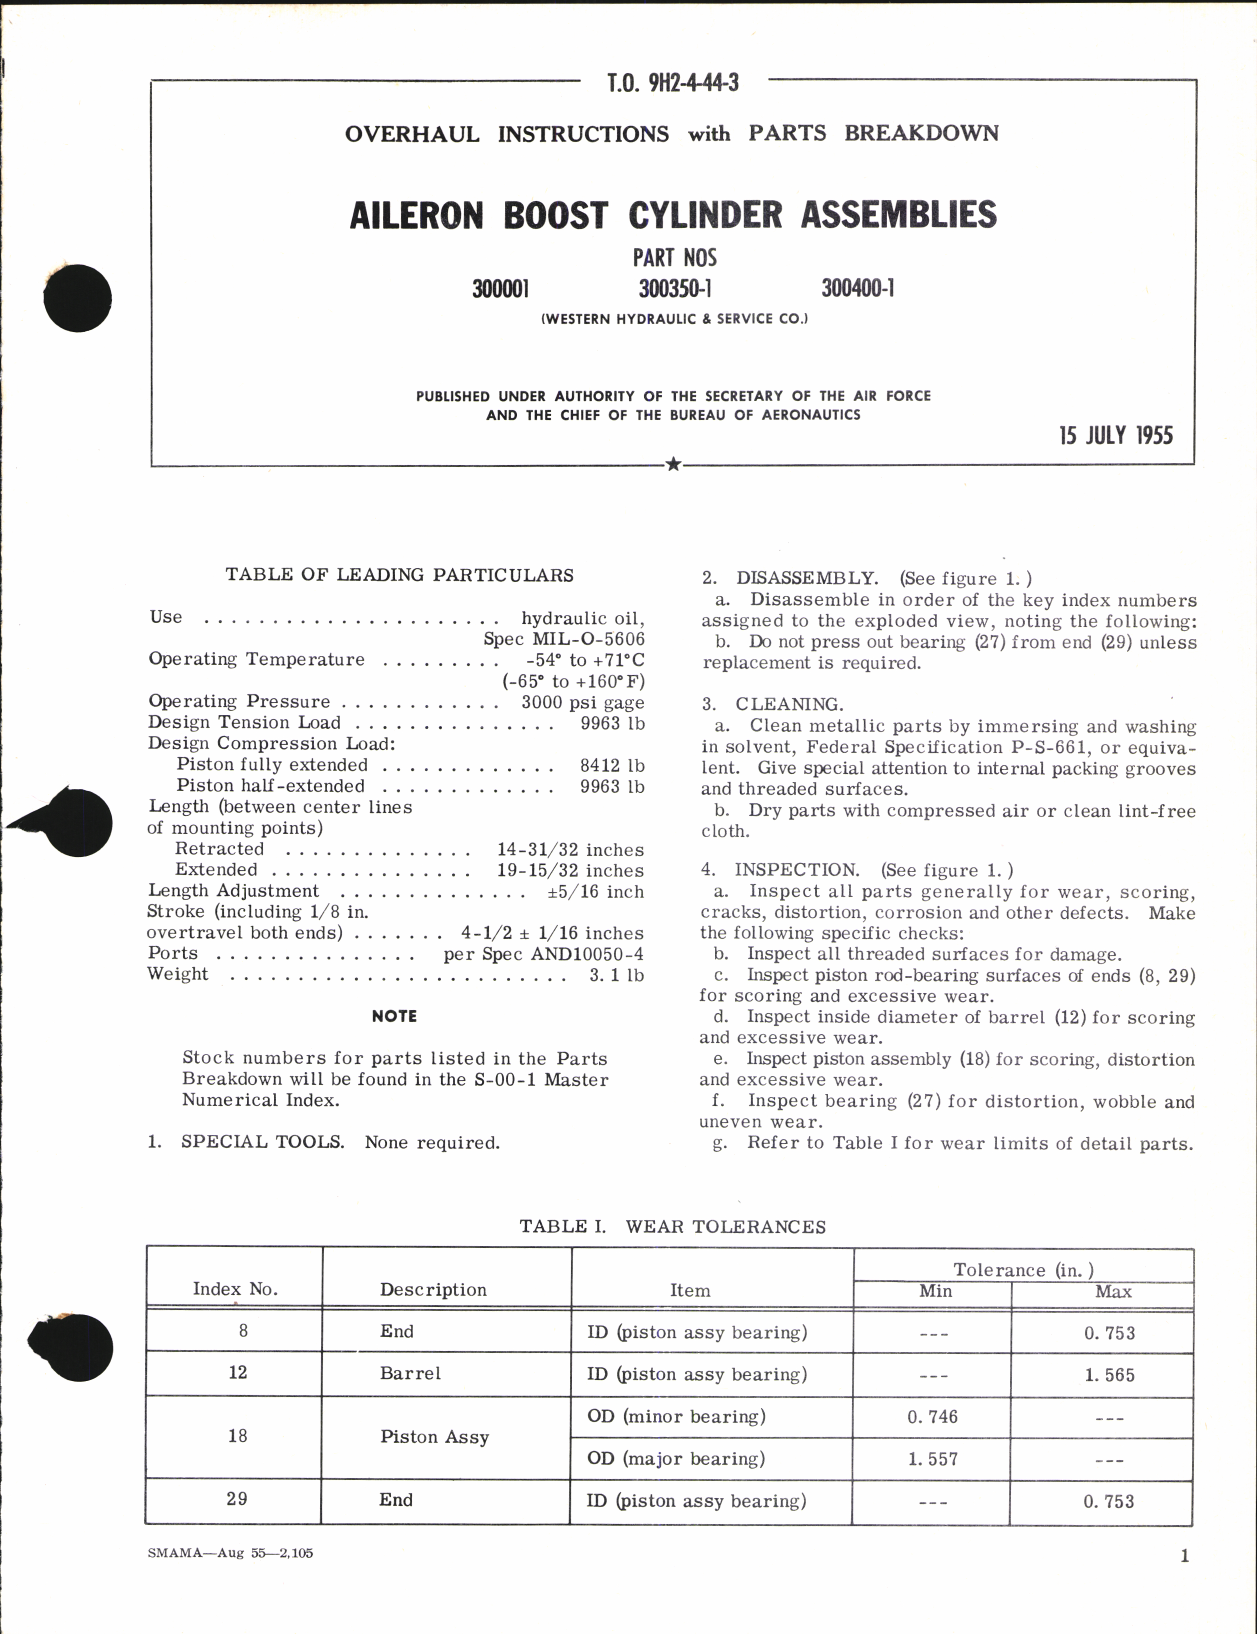 Sample page 1 from AirCorps Library document: Overhaul Instructions with Parts Breakdown for Aileron Boost Assemblies